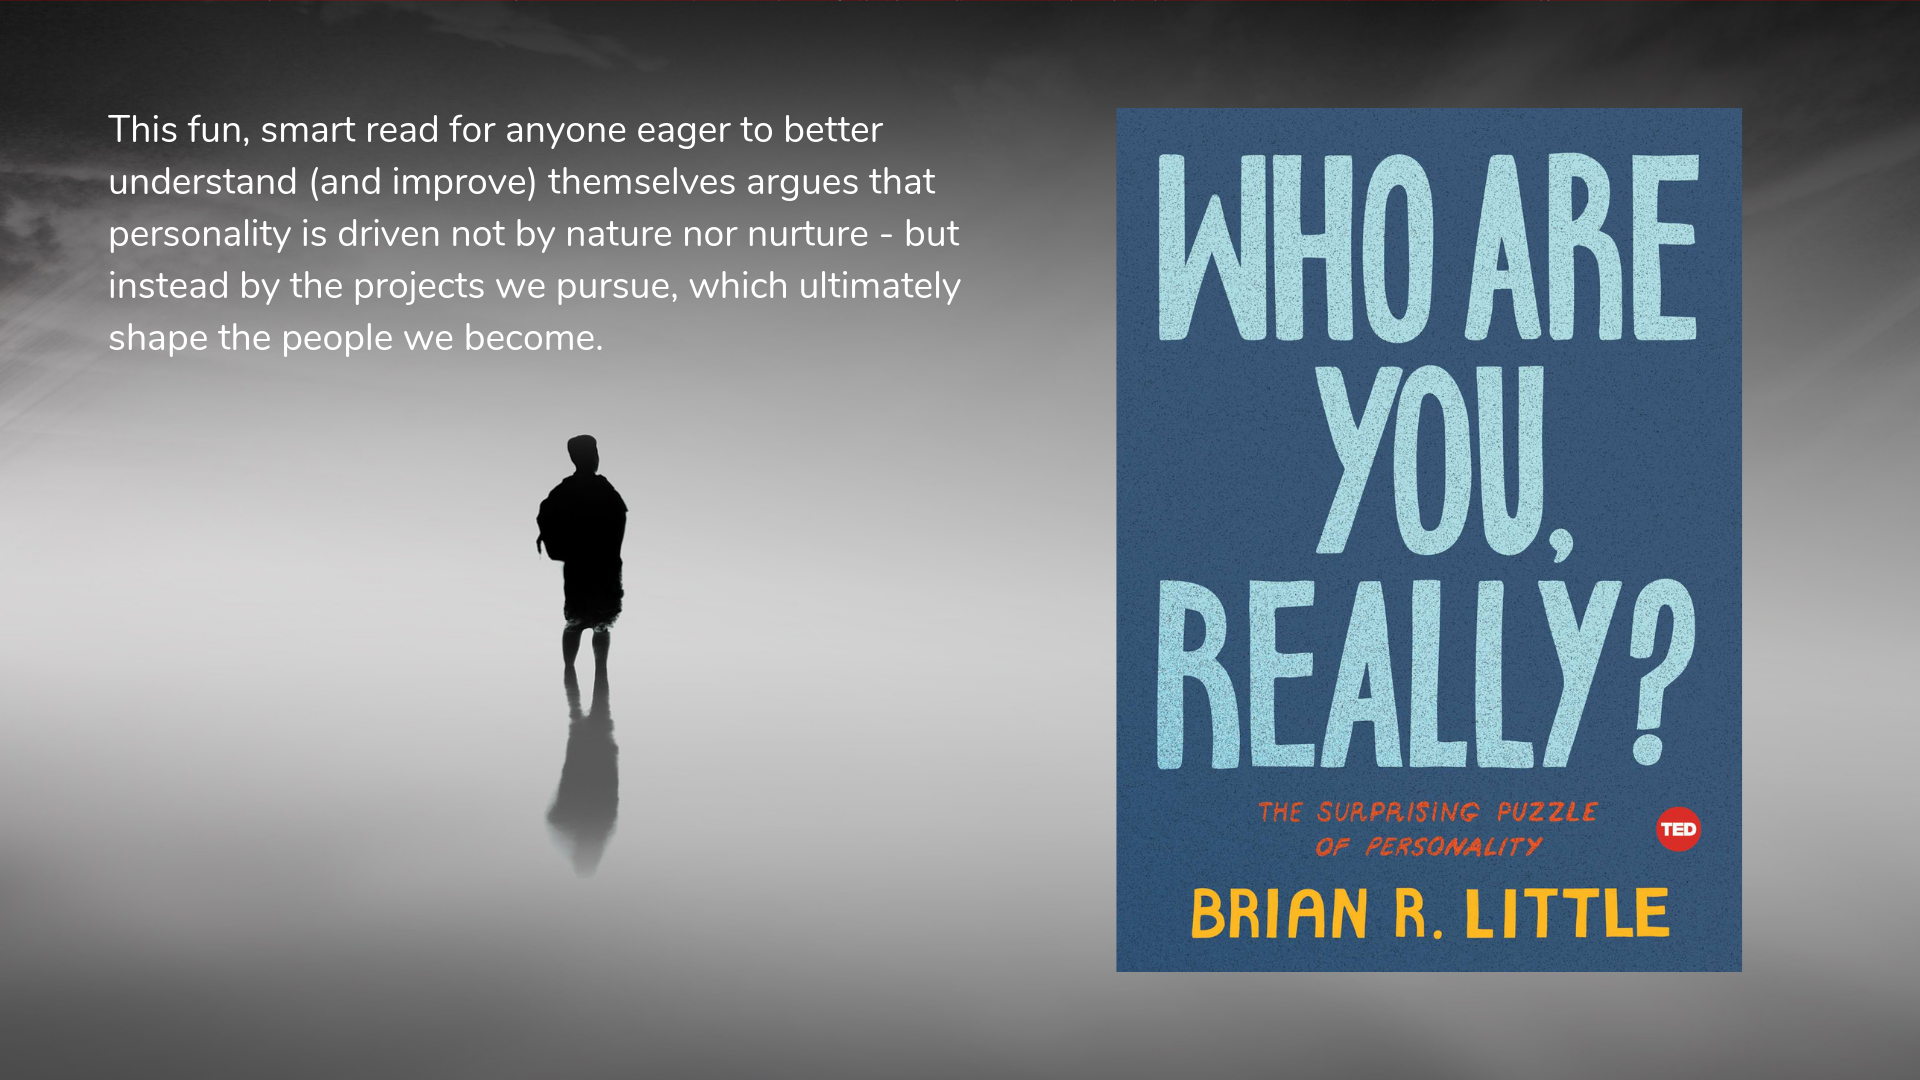 Who Are You, Really? The Surprising Puzzle of Personality by Dr. Brian Little - book cover and description.